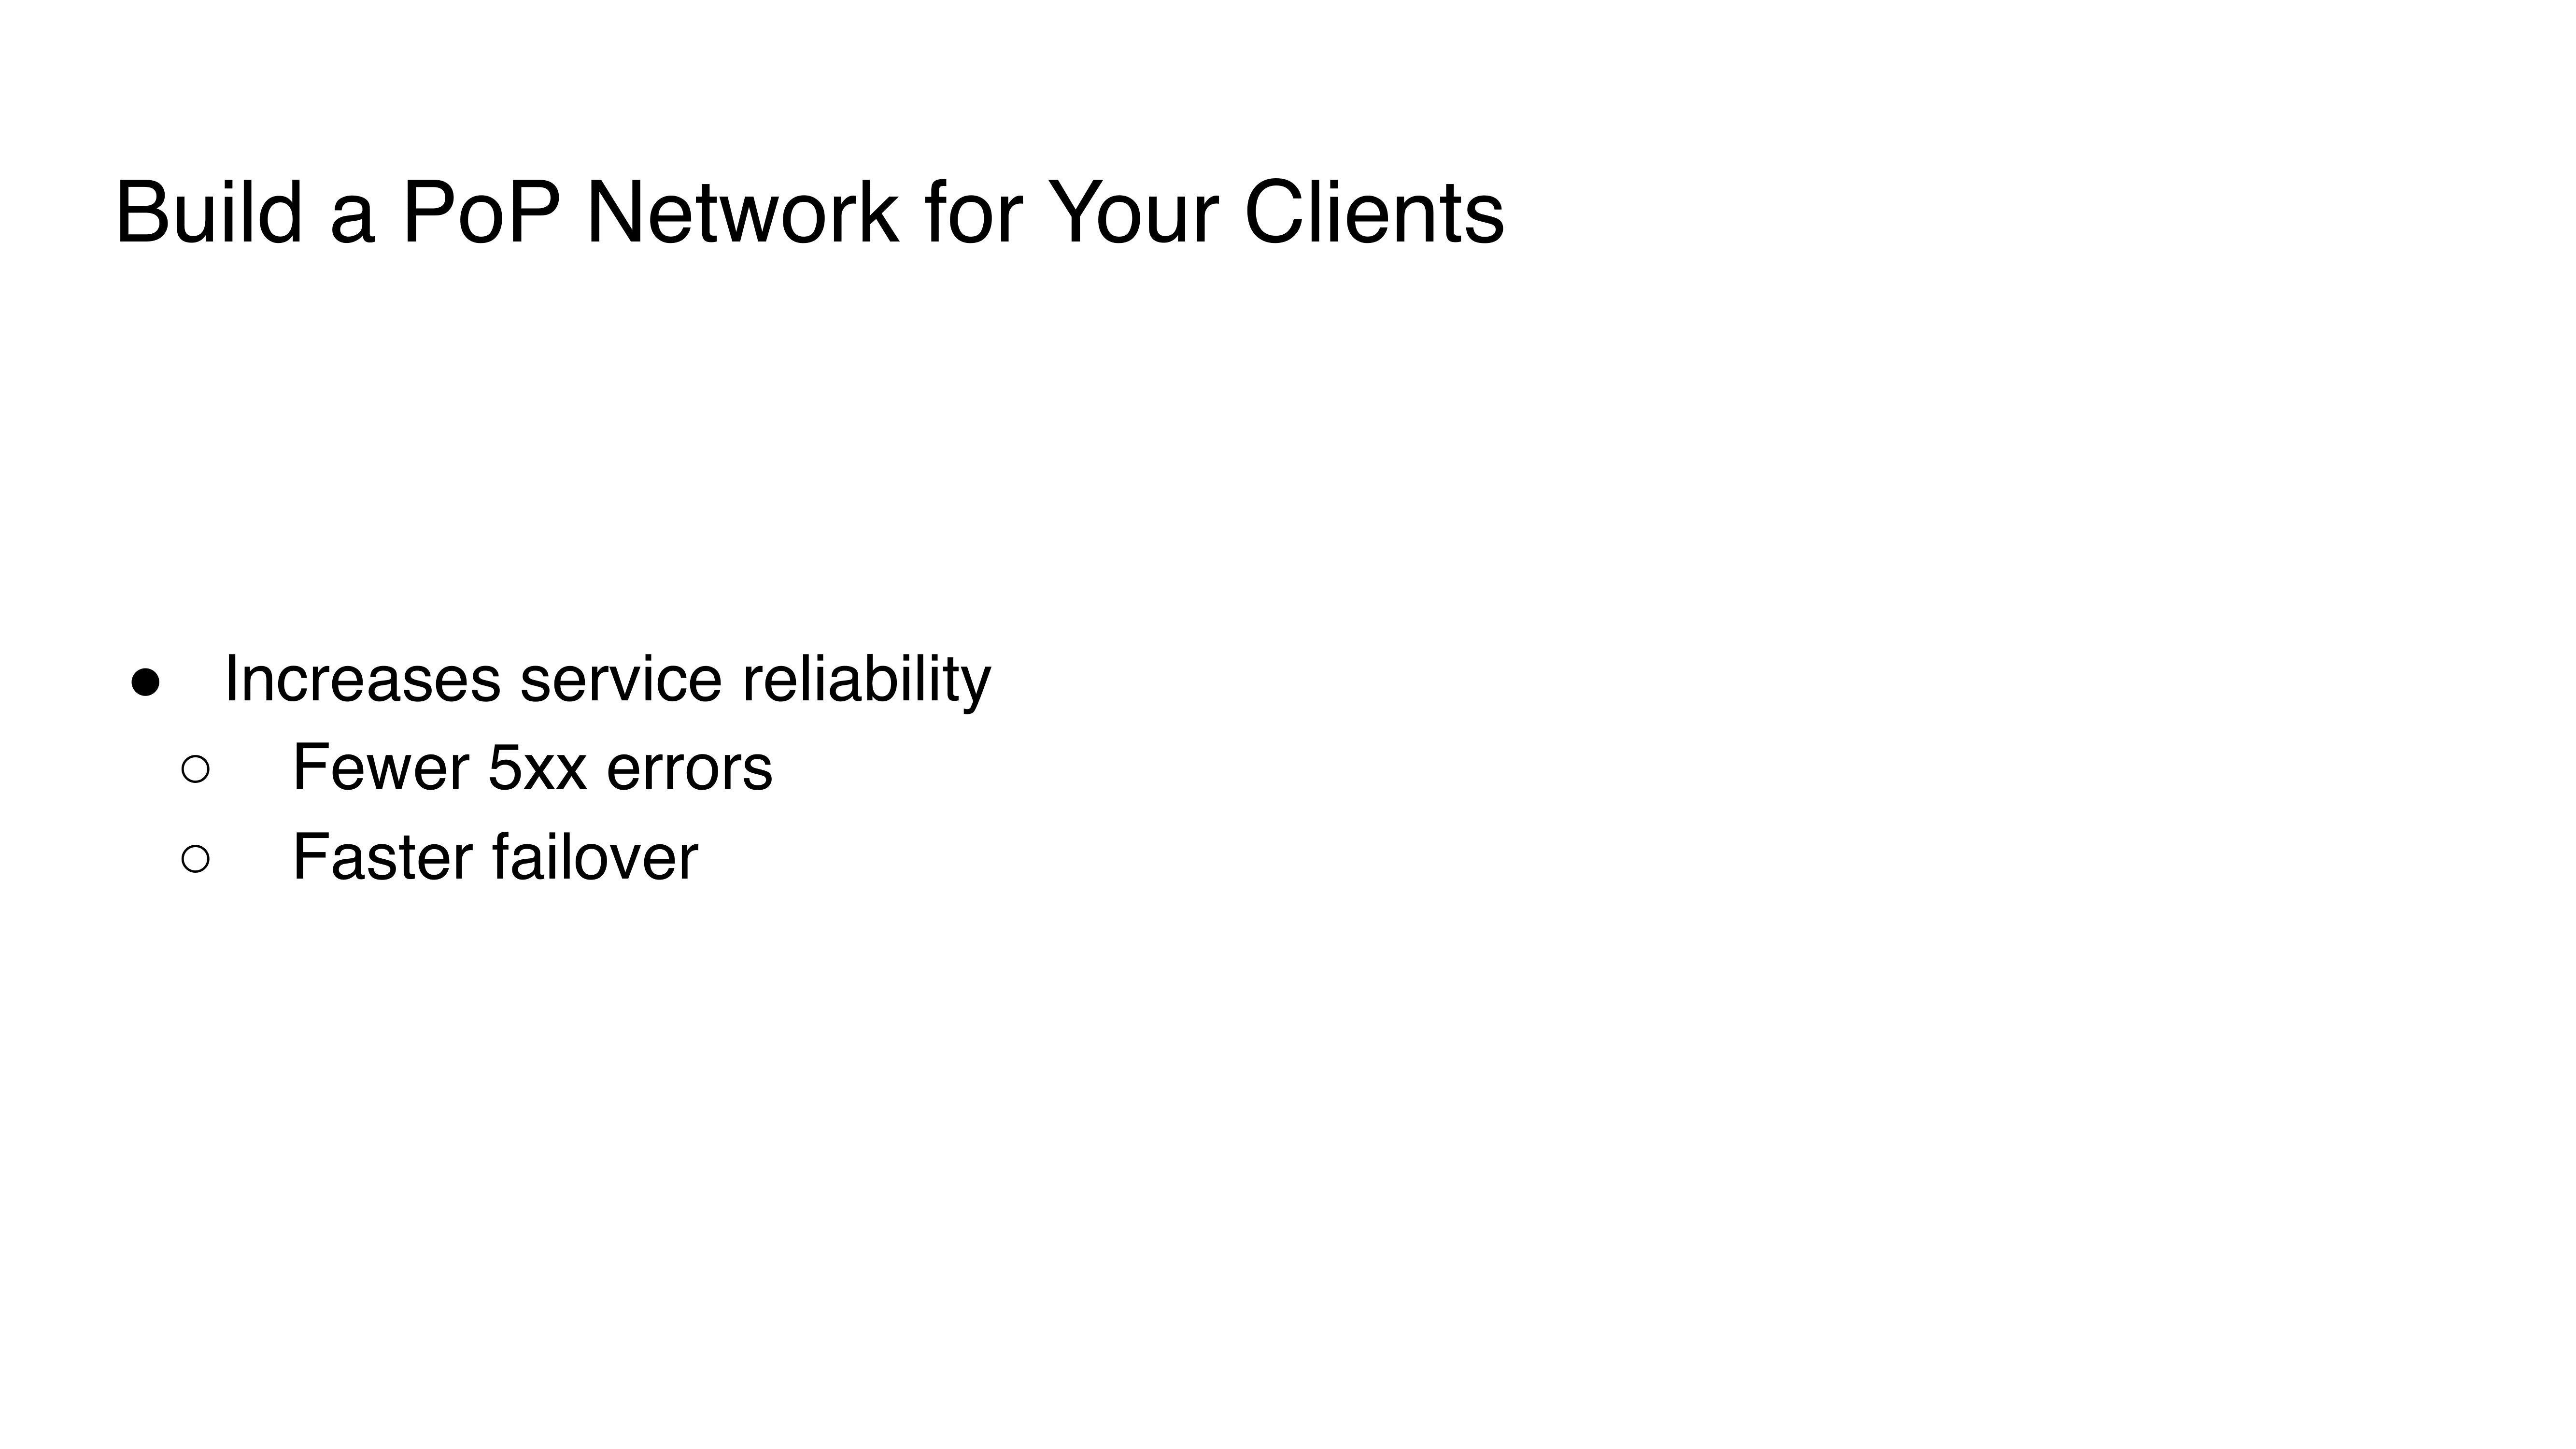 7.-build-a-pop-network-for-your-clients_increasees-service-reliability